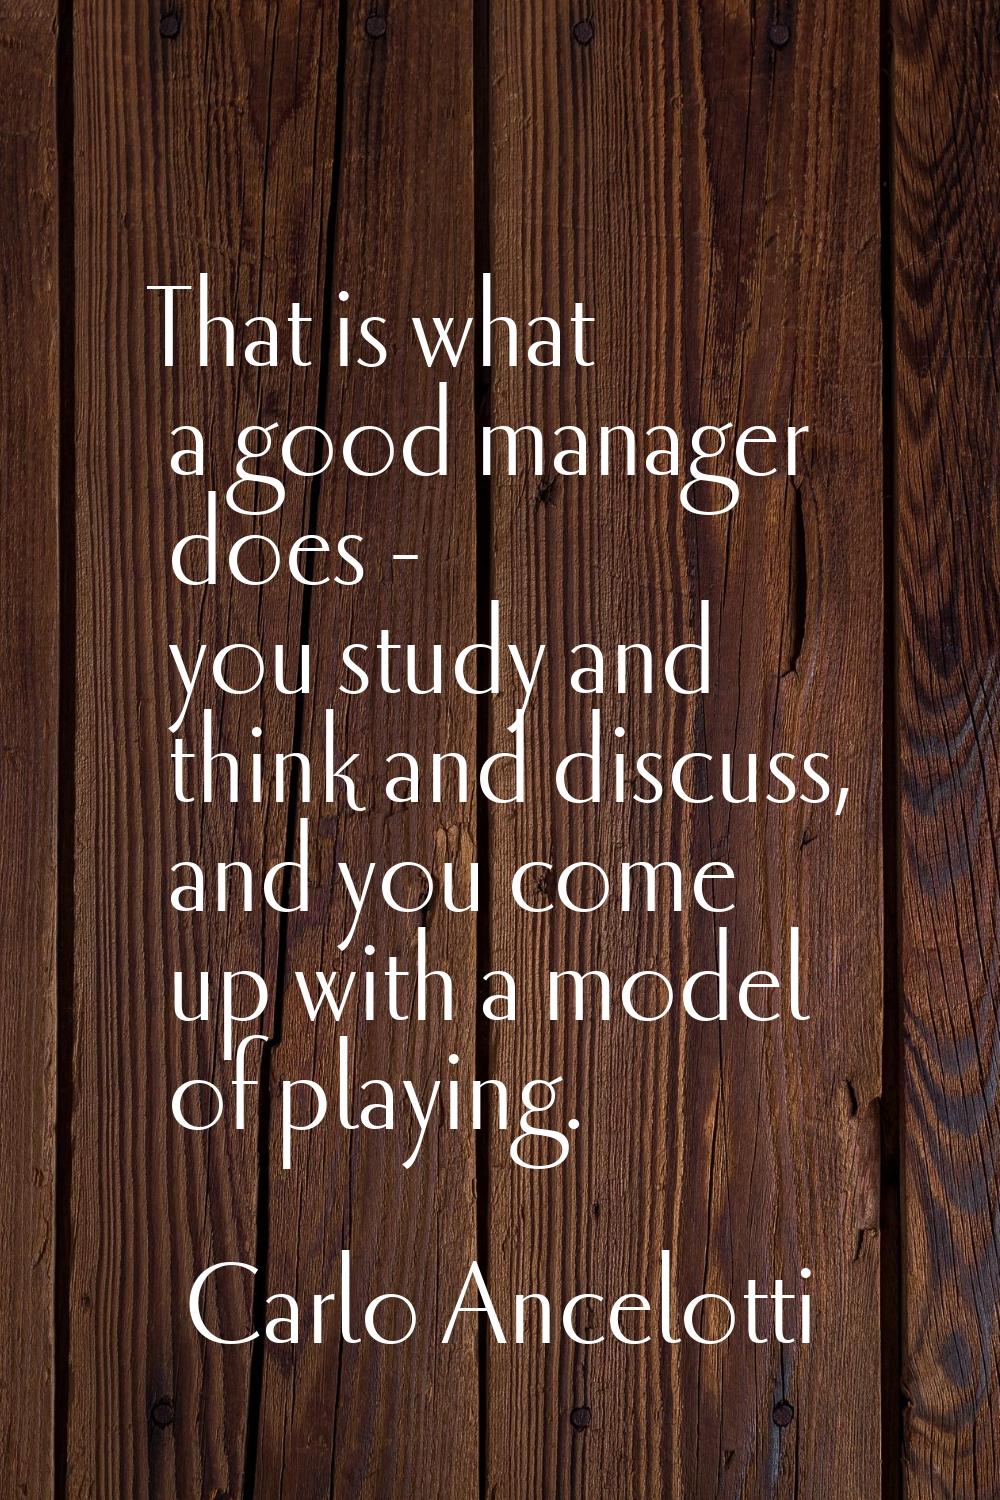 That is what a good manager does - you study and think and discuss, and you come up with a model of